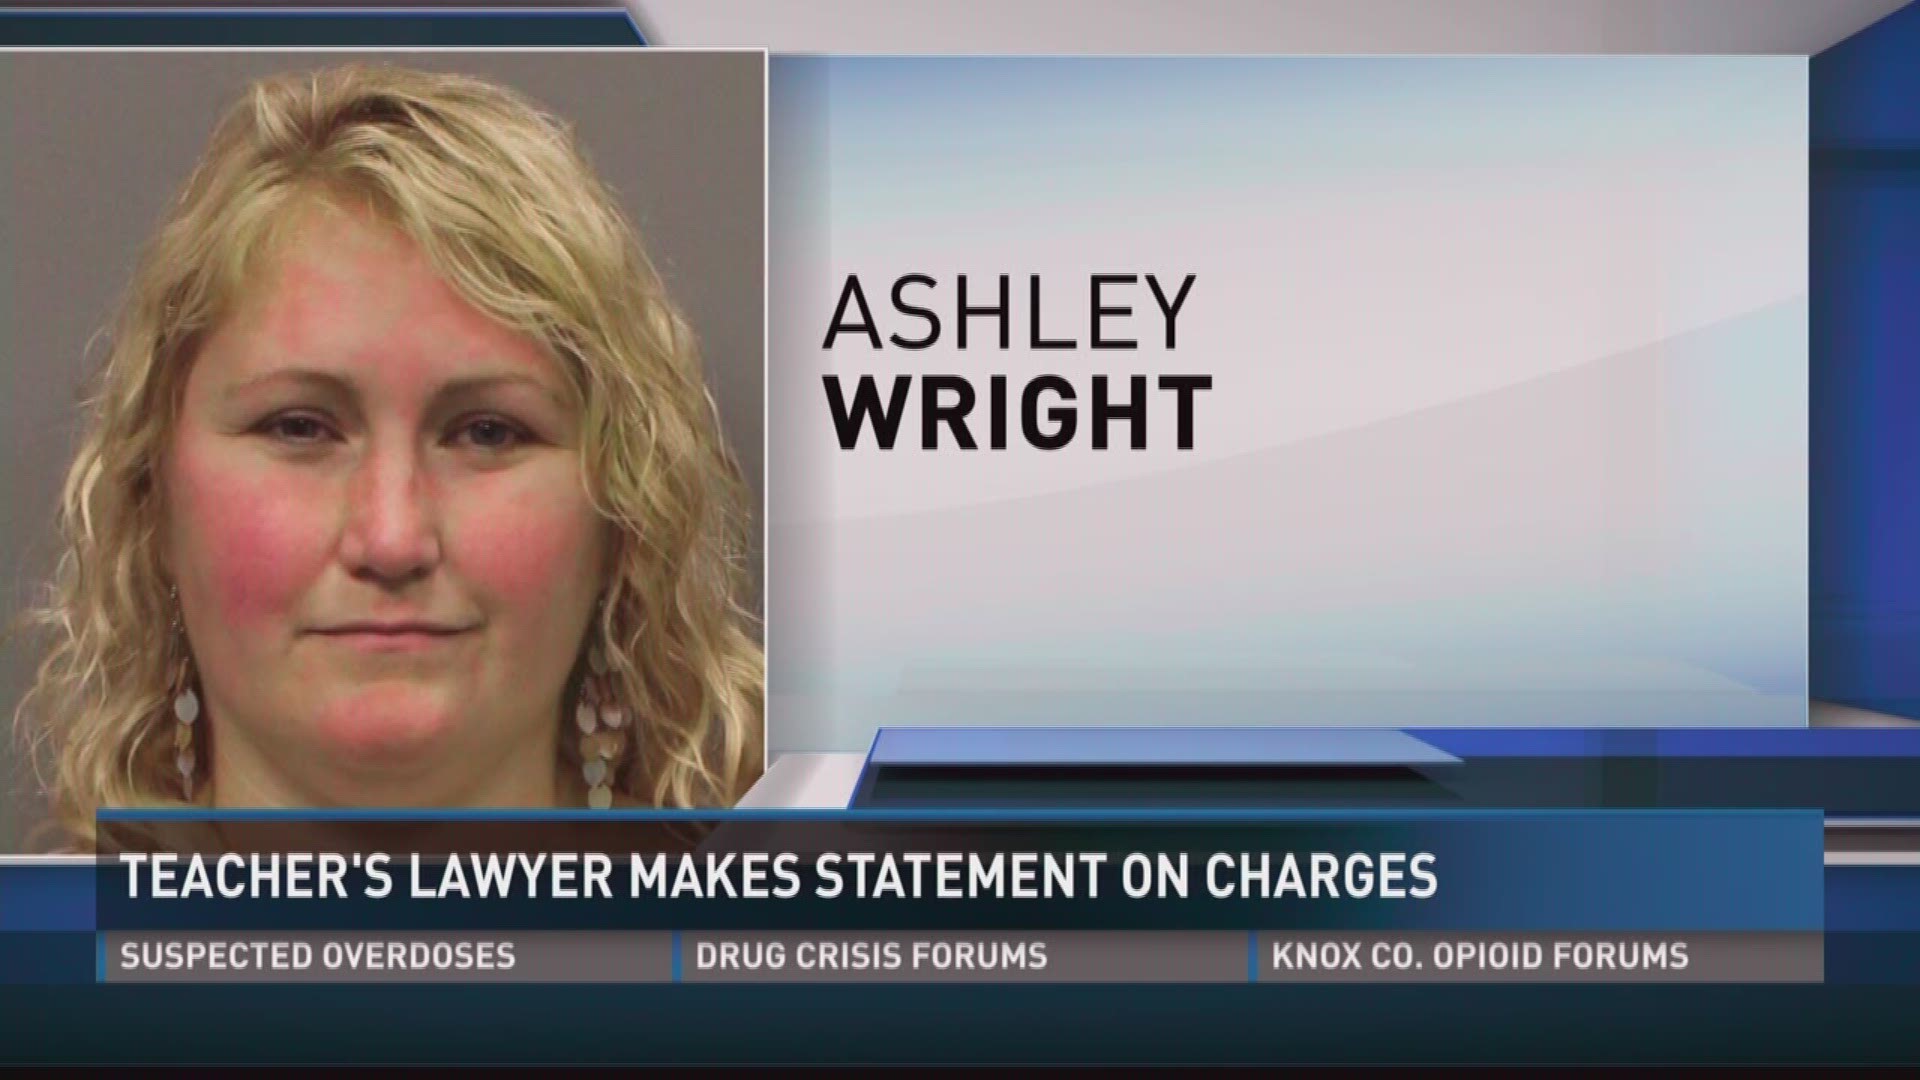 Sept. 27, 2017: The attorney for a Knox County teacher charged with identity theft says the allegations do not "relate in any way to her duties as a teacher."